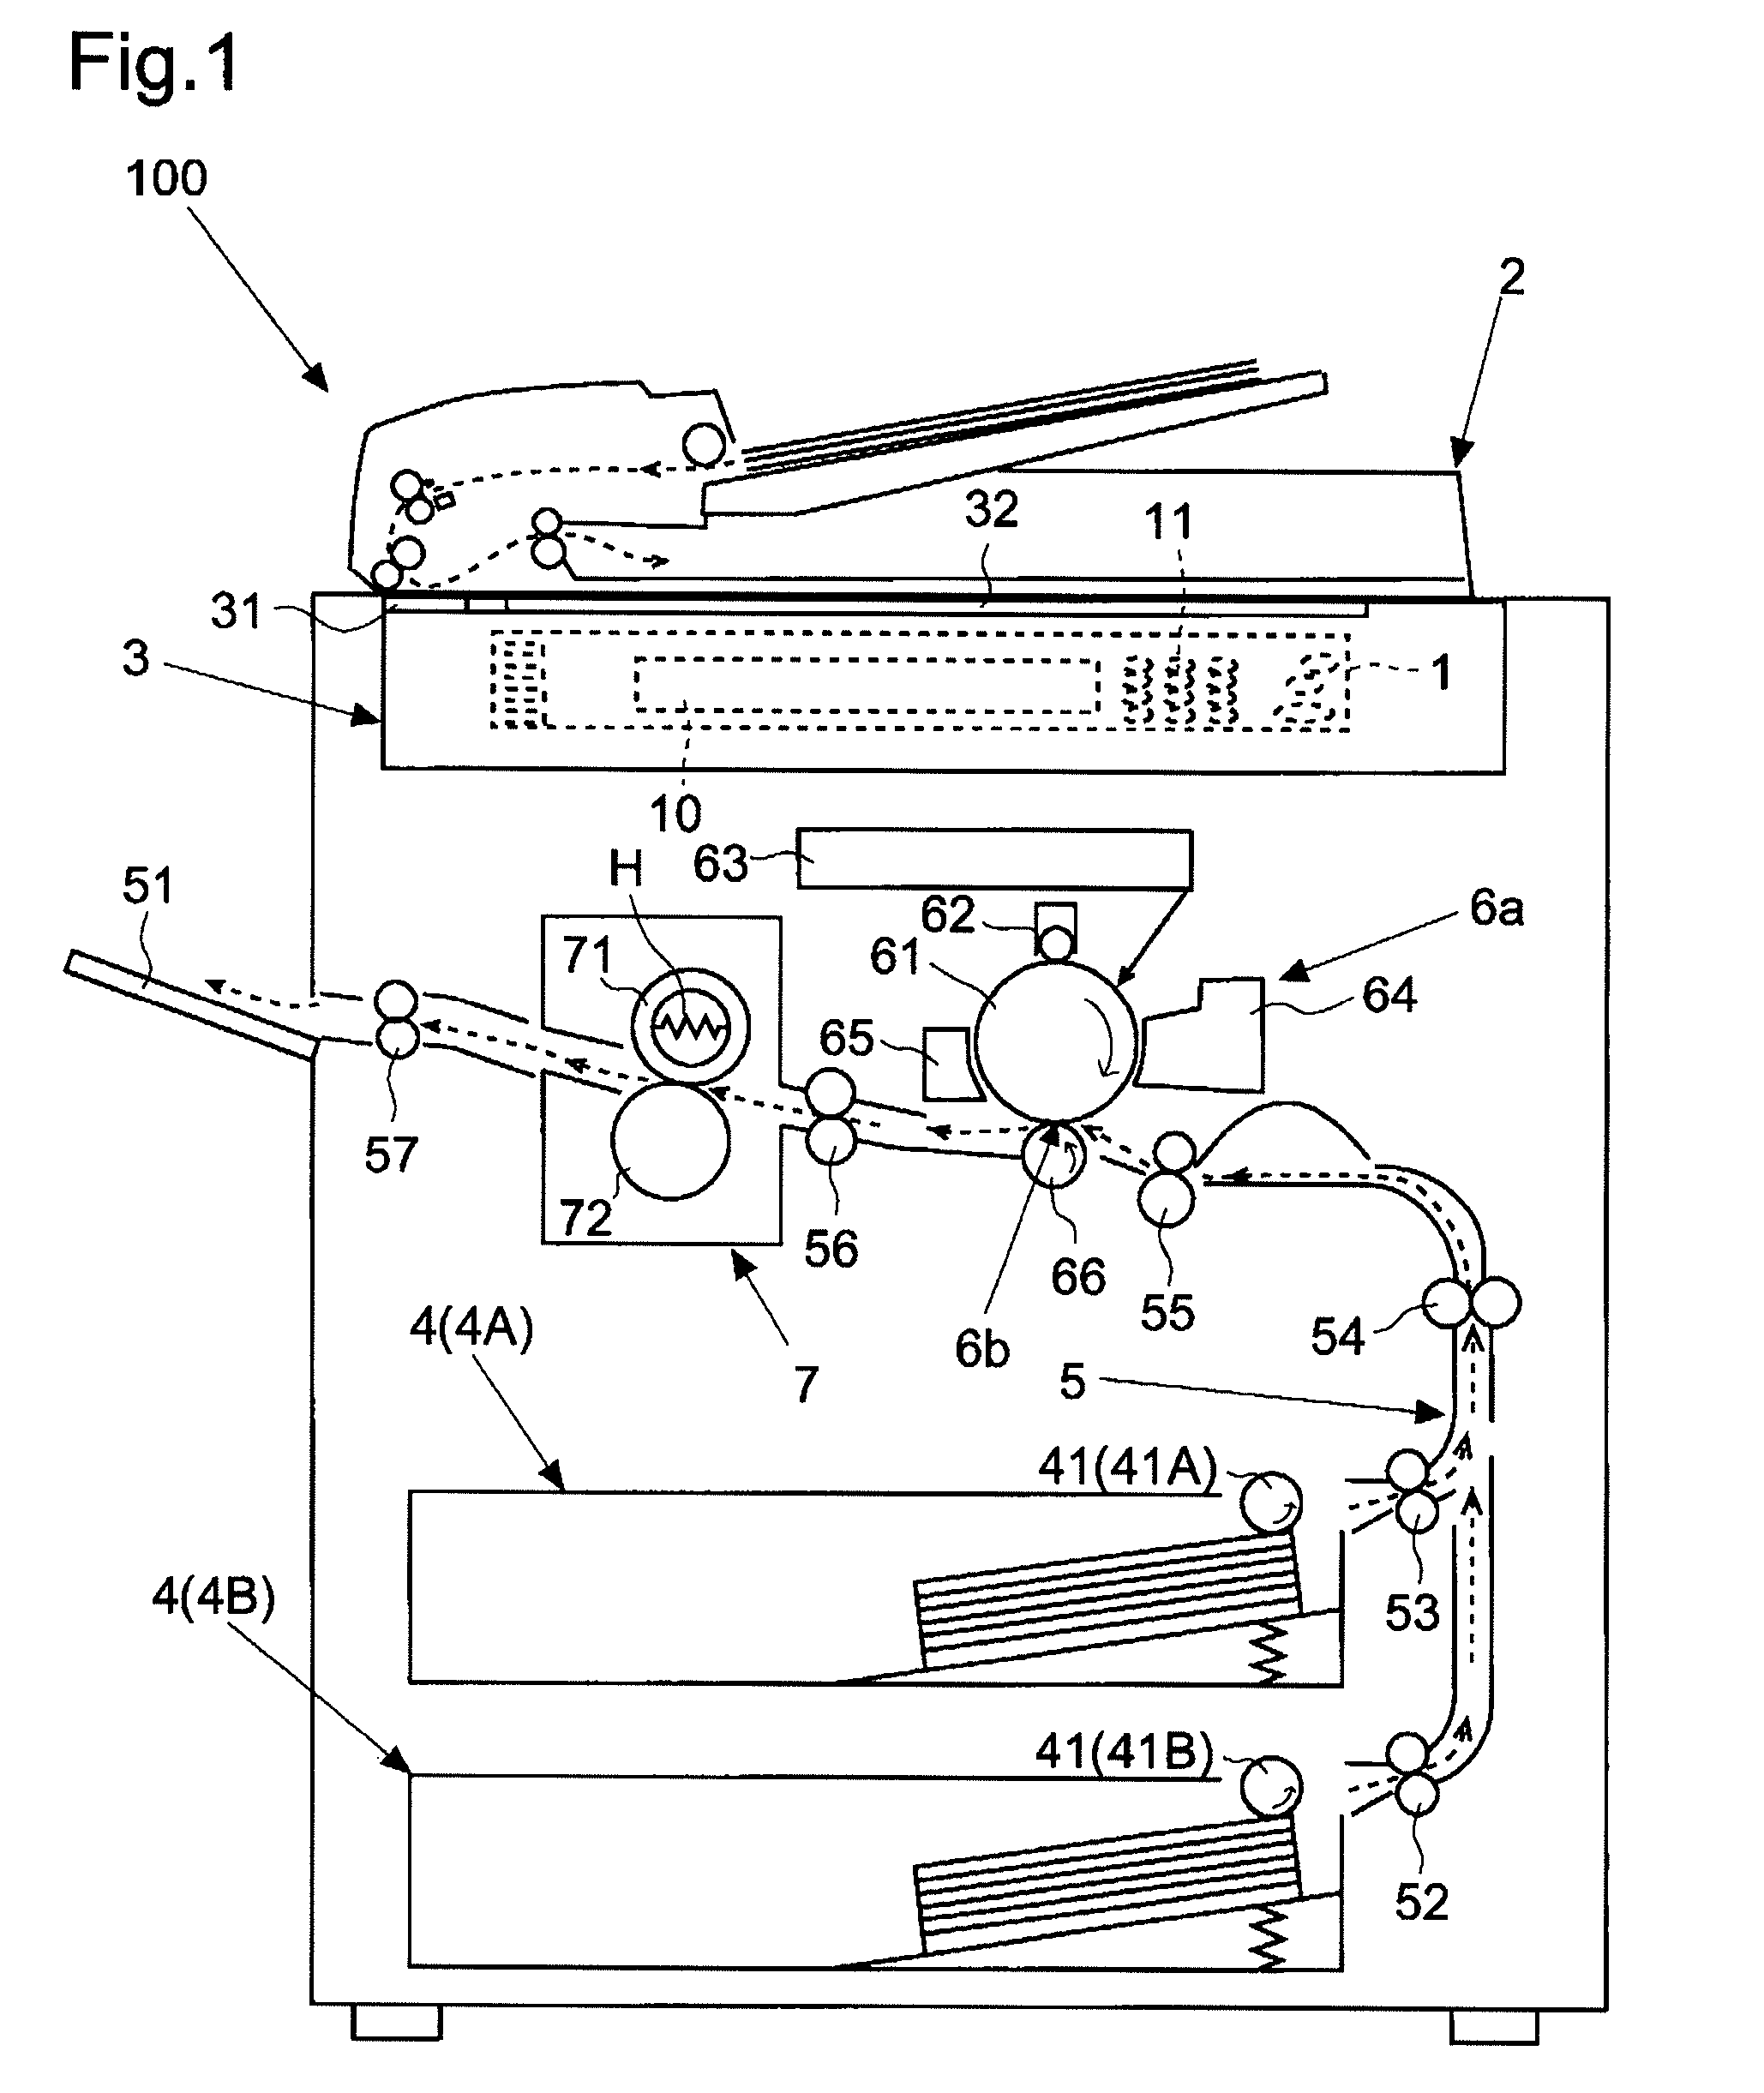 Image forming apparatus with heater control and error detection, and control method for the same